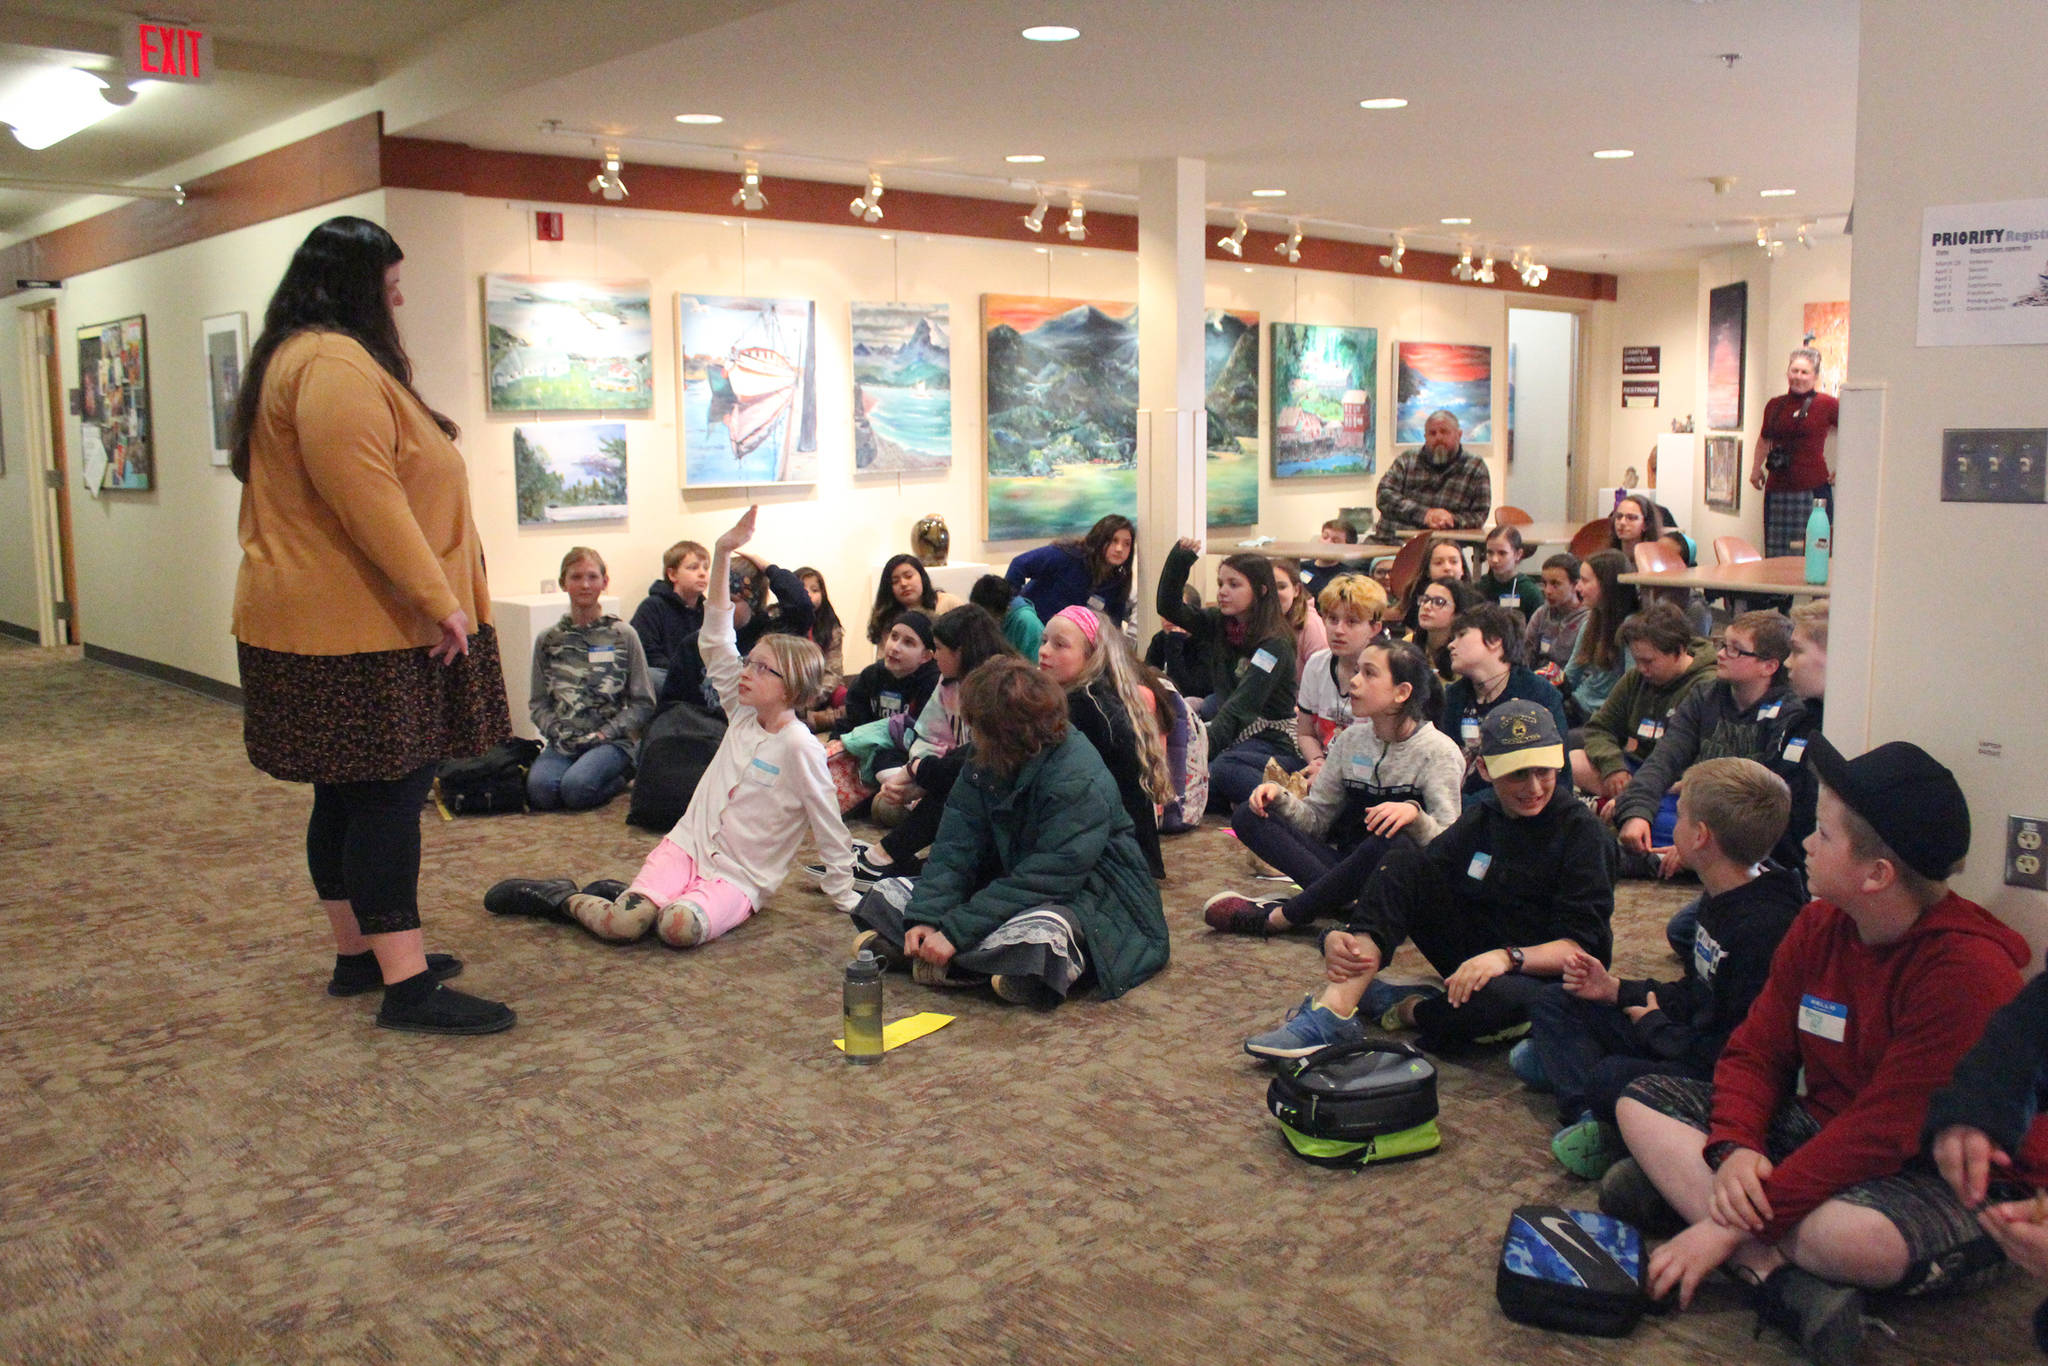 Nancy Johnson, student services counselor at Kachemak Bay Campus, talks to a group of sixth grade students at on a visit from West Homer Elementary School through the Kids2College program Friday, April 5, 2019 at the college campus in Homer, Alaska. (Photo by Megan Pacer/Homer News)